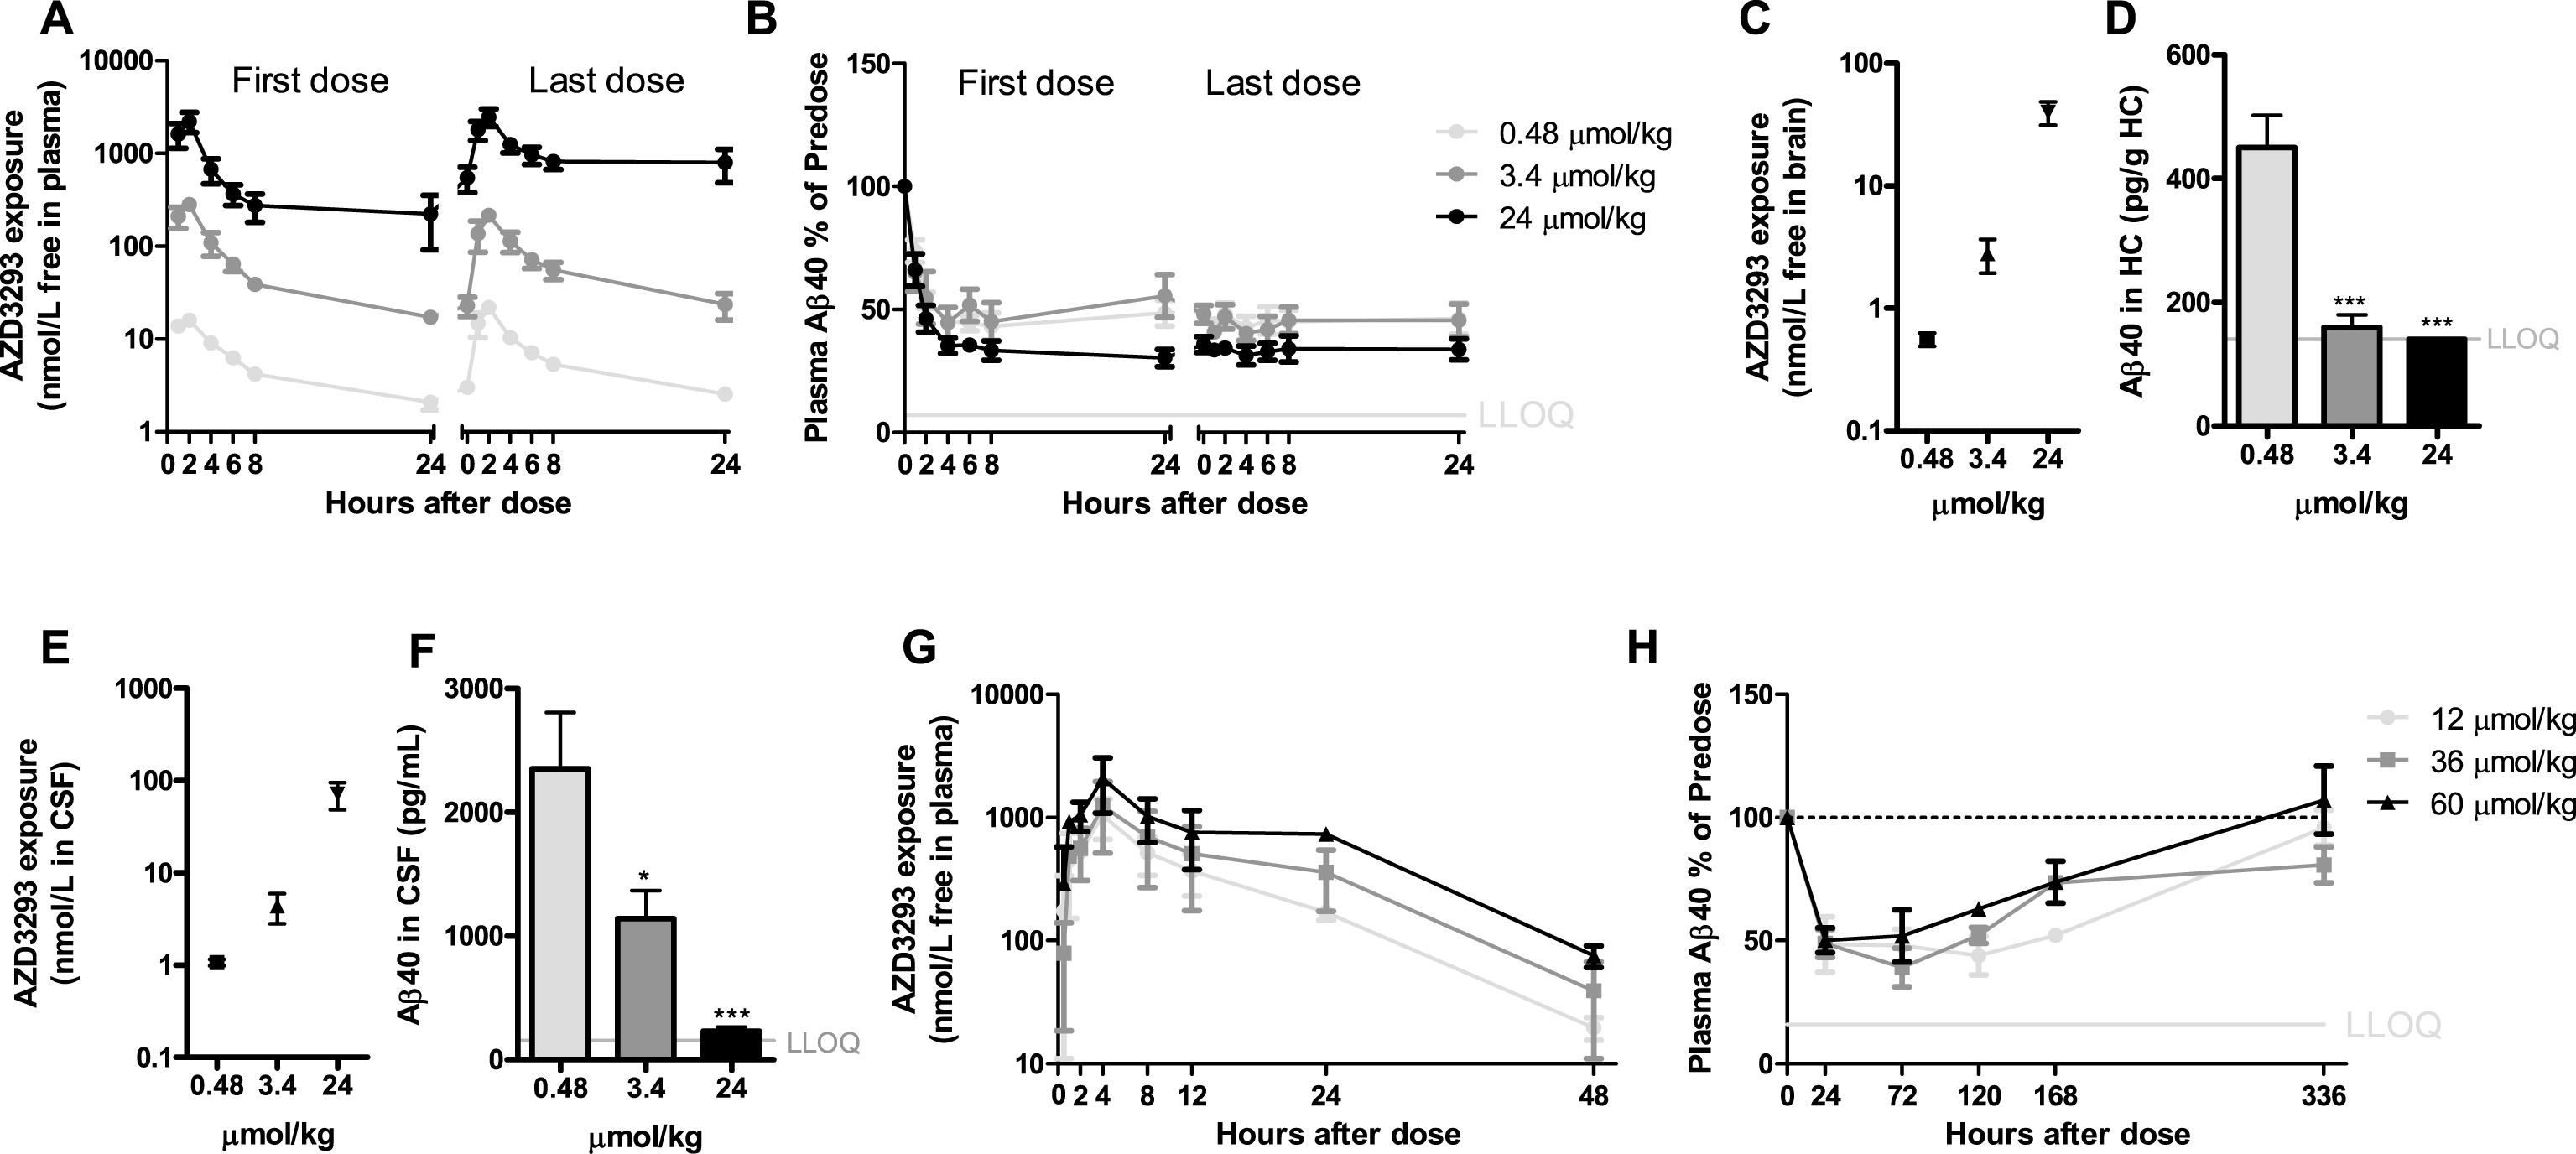 Time- and dose-dependent inhibition of plasma, CSF, and brain Aβ in dogs after oral administration of AZD3293. The dose regimens included 0.48, 3.4, or 24μmol/kg (0.2, 1.4, or 10 mg/kg) daily for 2 weeks (A–F) and a single dose of 12, 36, or 60μmol/kg (5, 15, or 25 mg/kg) (G, H). Maximum plasma AZD3293 concentration was observed at 2 h after dosing (A). AZD3293 resulted in time- and dose-dependent effects on plasma Aβ40 (B). A dose-dependent increase in free brain AZD3293 concentration (hippocampus, C) and reduction in hippocampus Aβ40 (D) were observed at 24 h after the last dose. A dose-dependent increase in CSF exposure (E) and a reduction in brain Aβ40 (G) at 24 h after the last dose were established. At doses of 12, 36, or 60μmol/kg, plasma AZD3293 concentrations increased with dose (G), while the increase in dose did not result in increased effect with Aβ40 concentrations in plasma as read-out (H). Data are presented as Mean±SEM ( *p <  0.05;  **p <  0.01,  ***p <  0.001, compared with low dose). Lower limit of quantification (LLOQ).